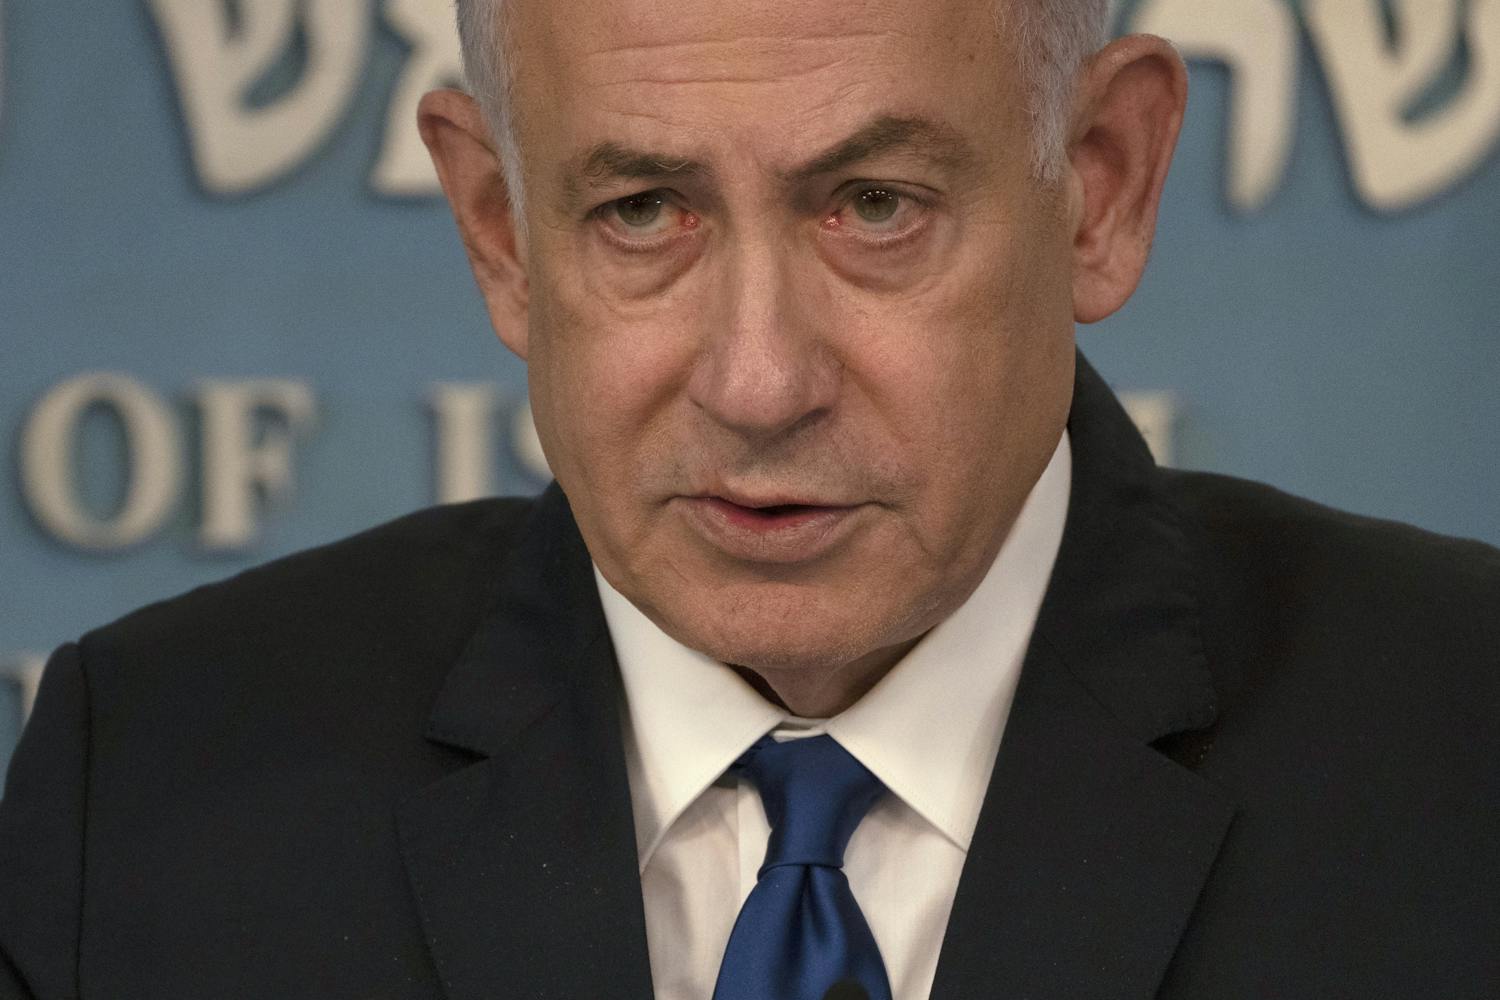 “Netanyahu received tremendous criticism from the Americans.”